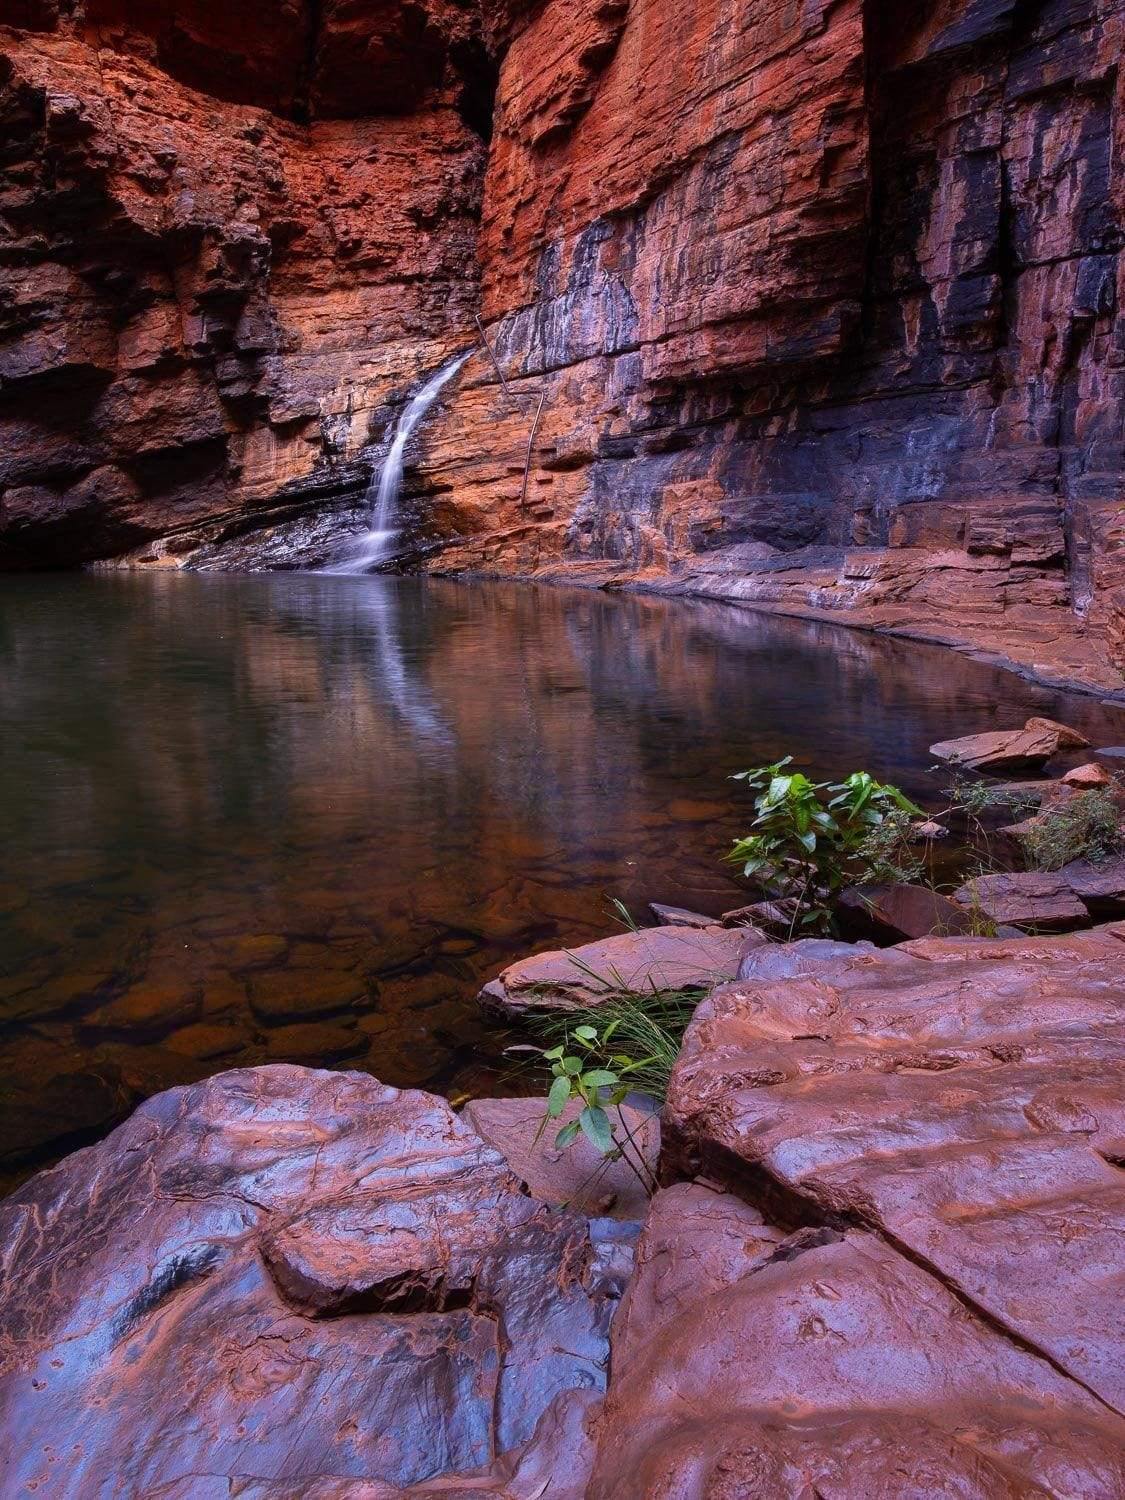 A small lake surrounded by mountain walls and stones, Handrail Tranquility - Karijini, The Pilbara